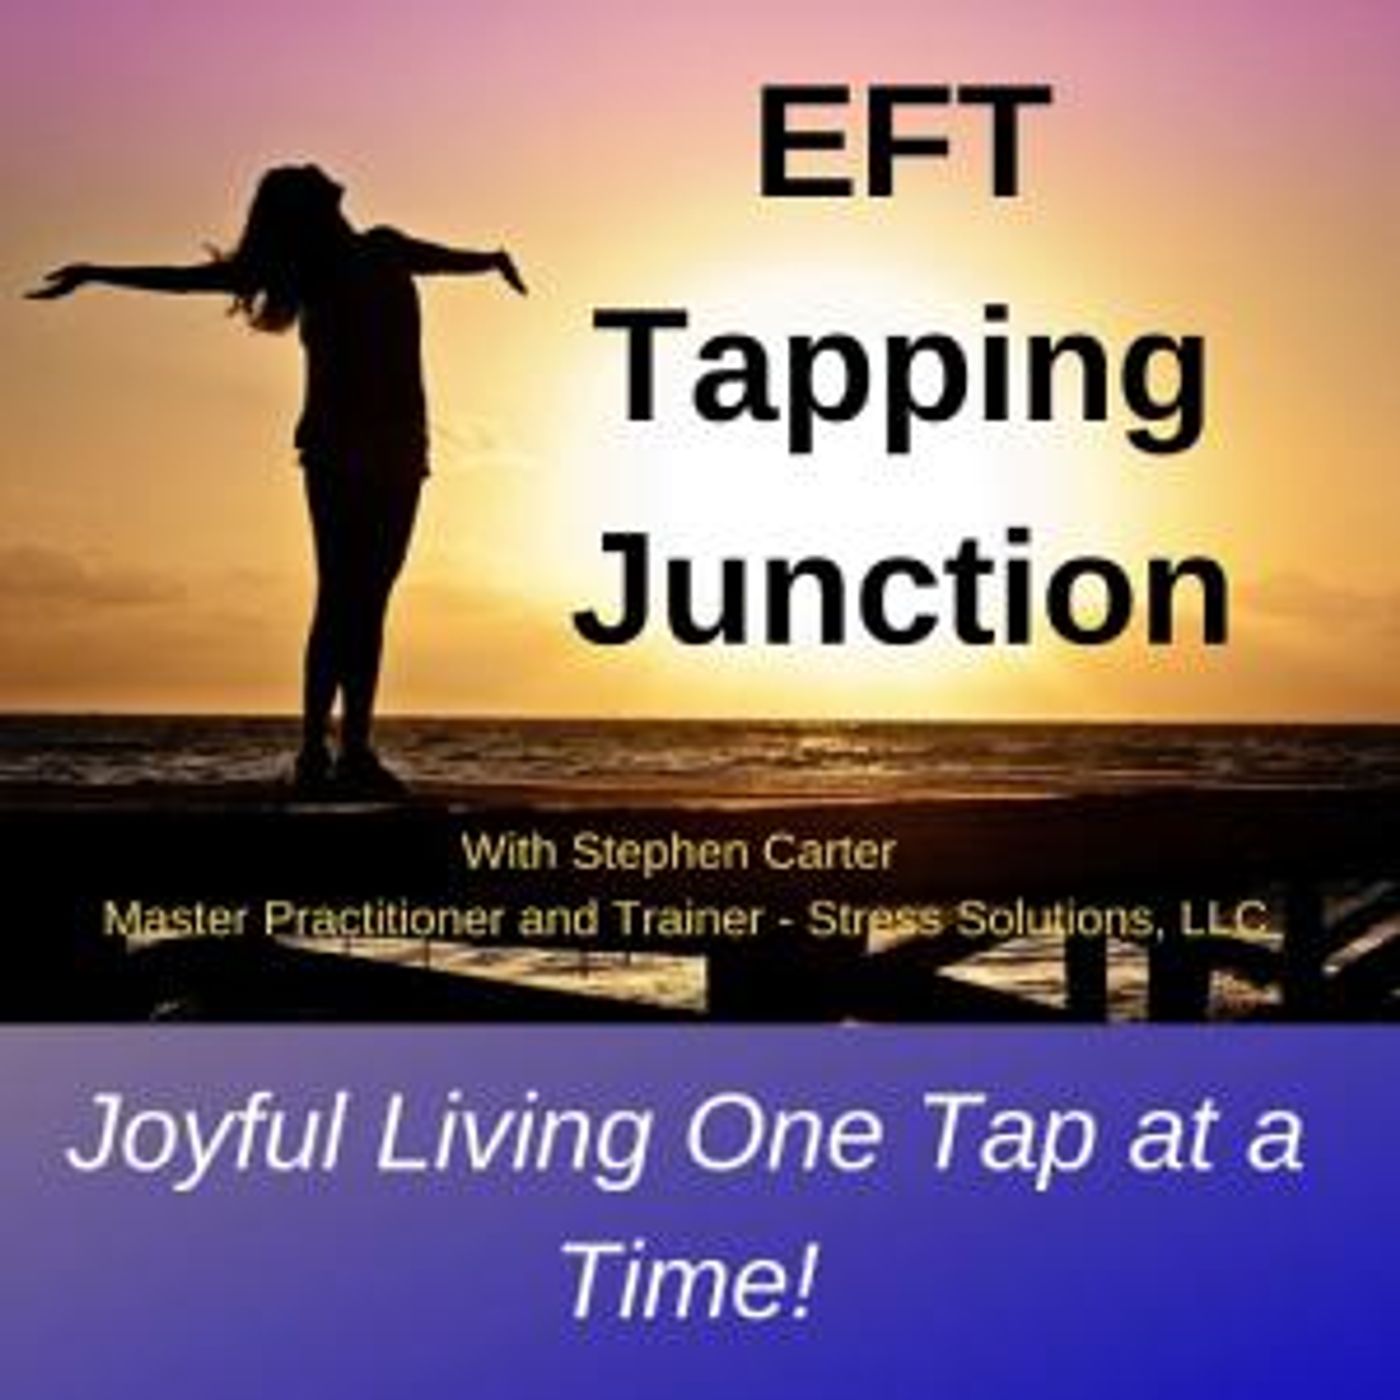 How to Use EFT to Help Abuse Survivors With Angela Rae Clark